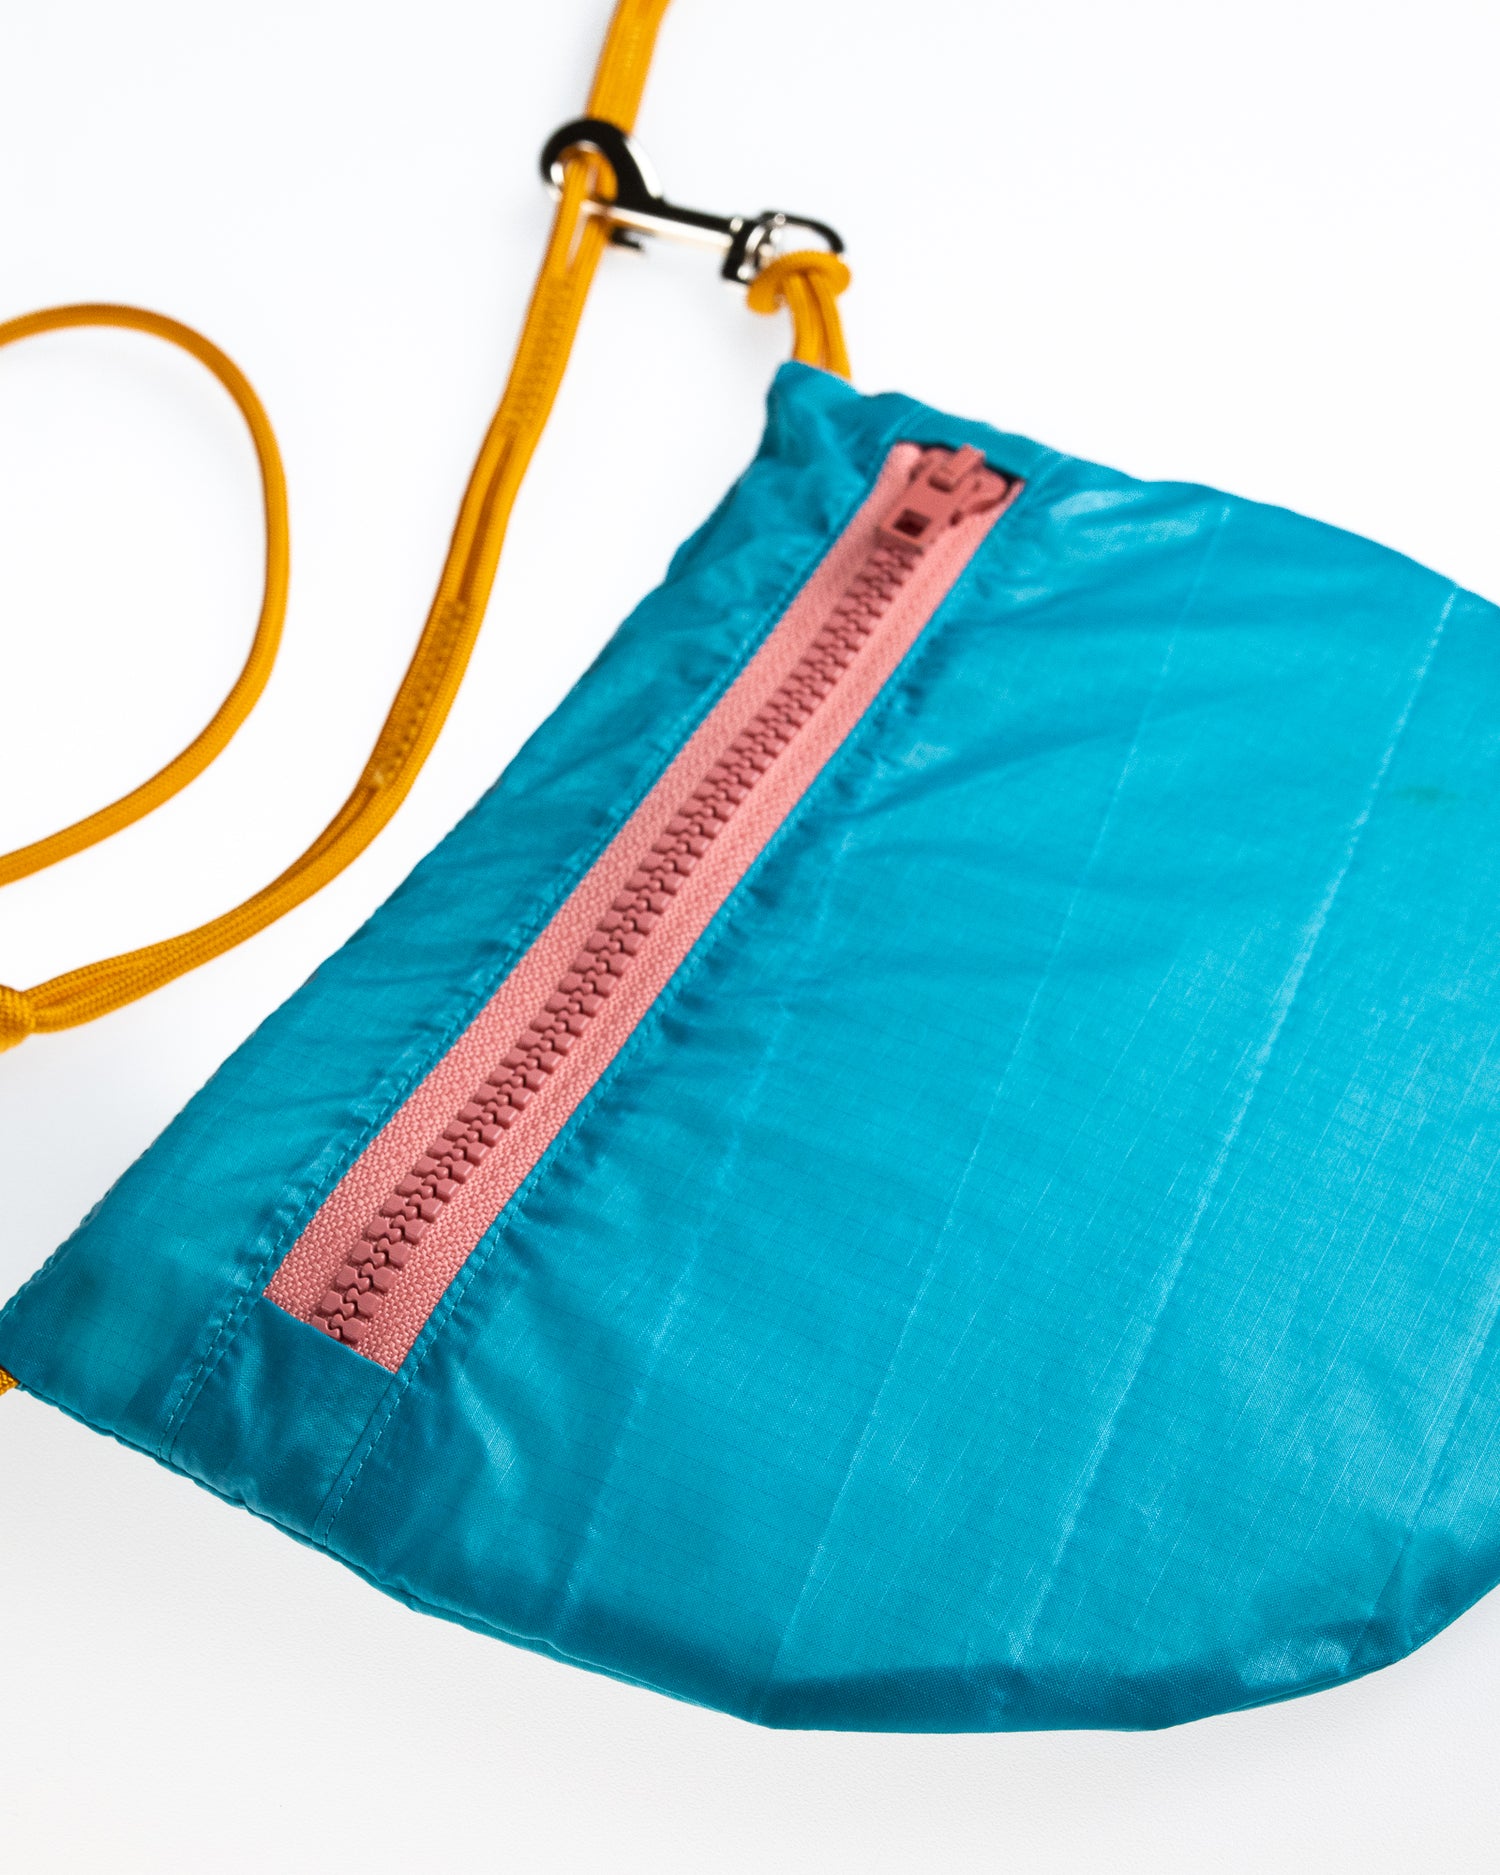 sling bag in turquoise with dusty rose zipper and orange rope strap made from recycled ripstop nylon